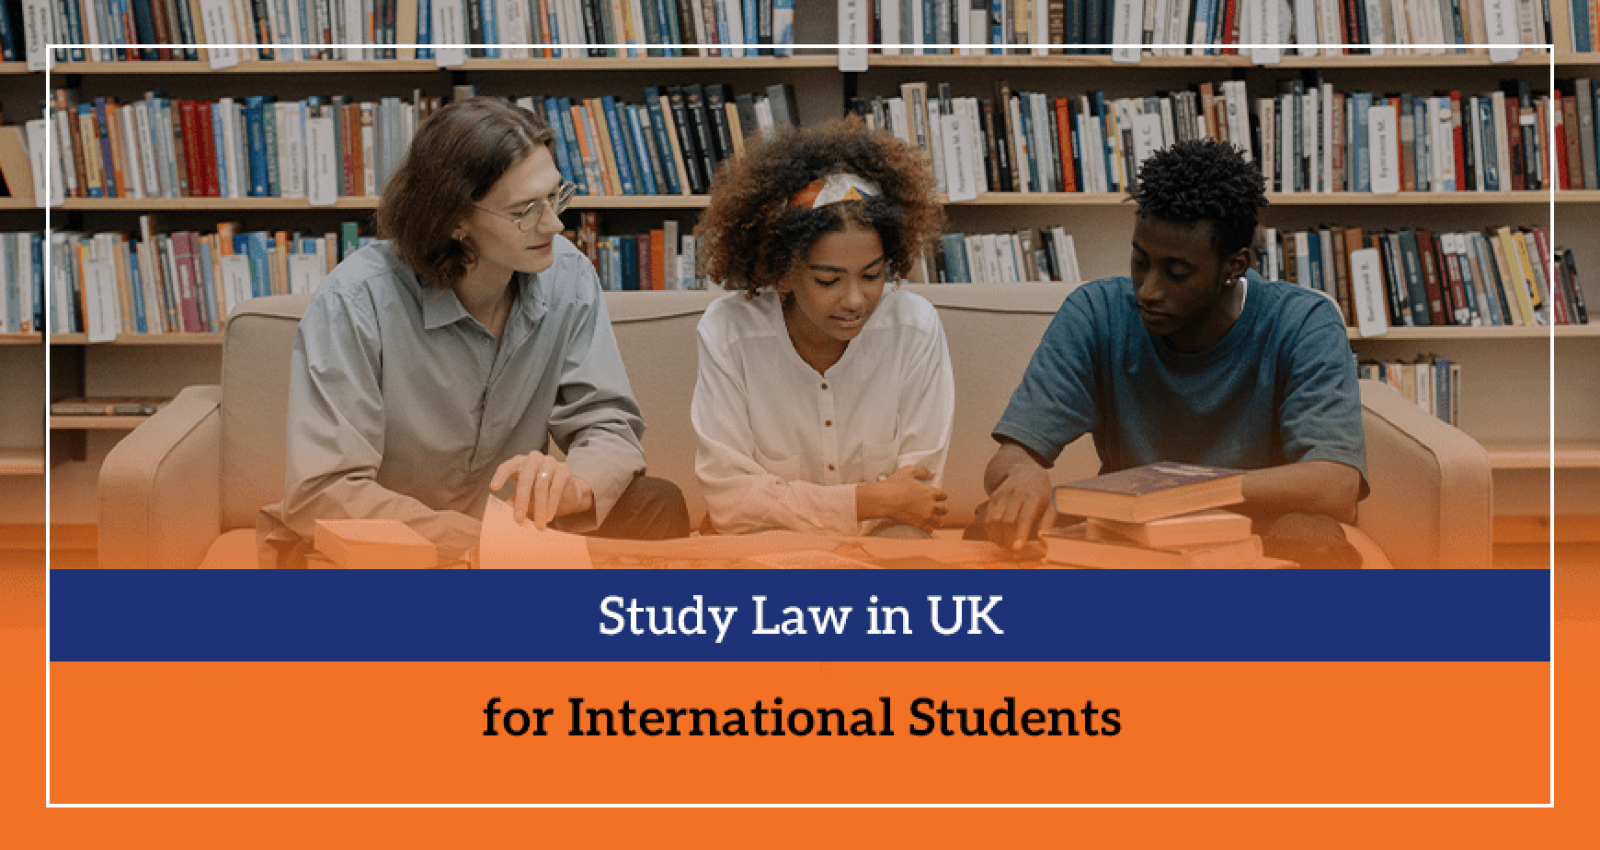 Study Law in UK for International Students